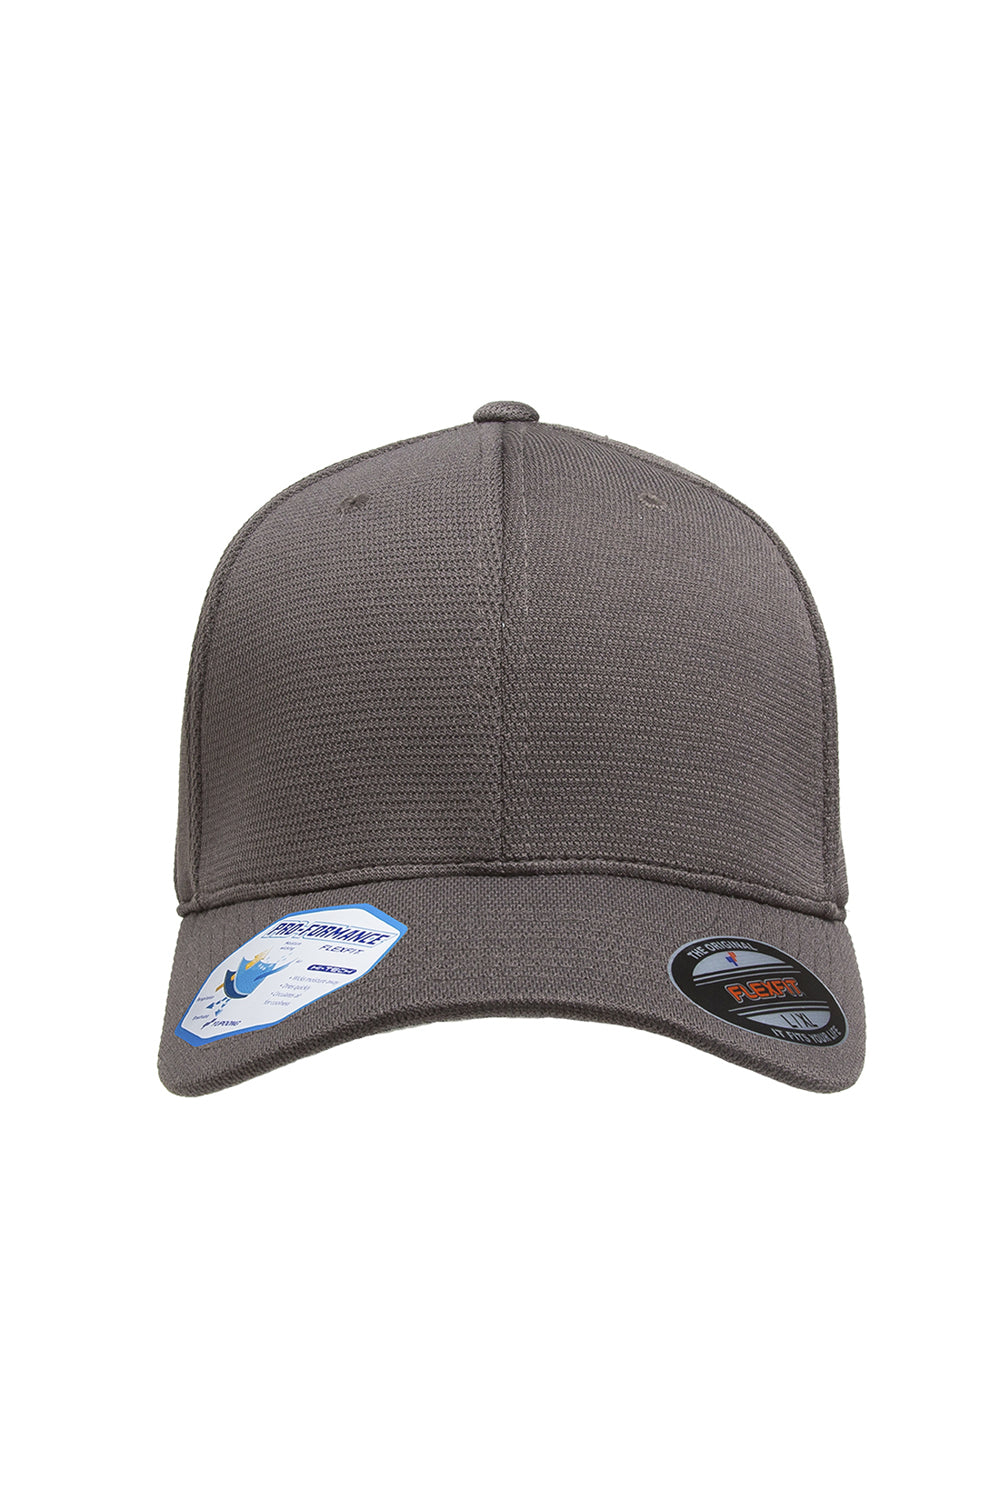 Flexfit 6597 Mens Cool & Dry Moisture Wicking Stretch Fit Hat Grey Front